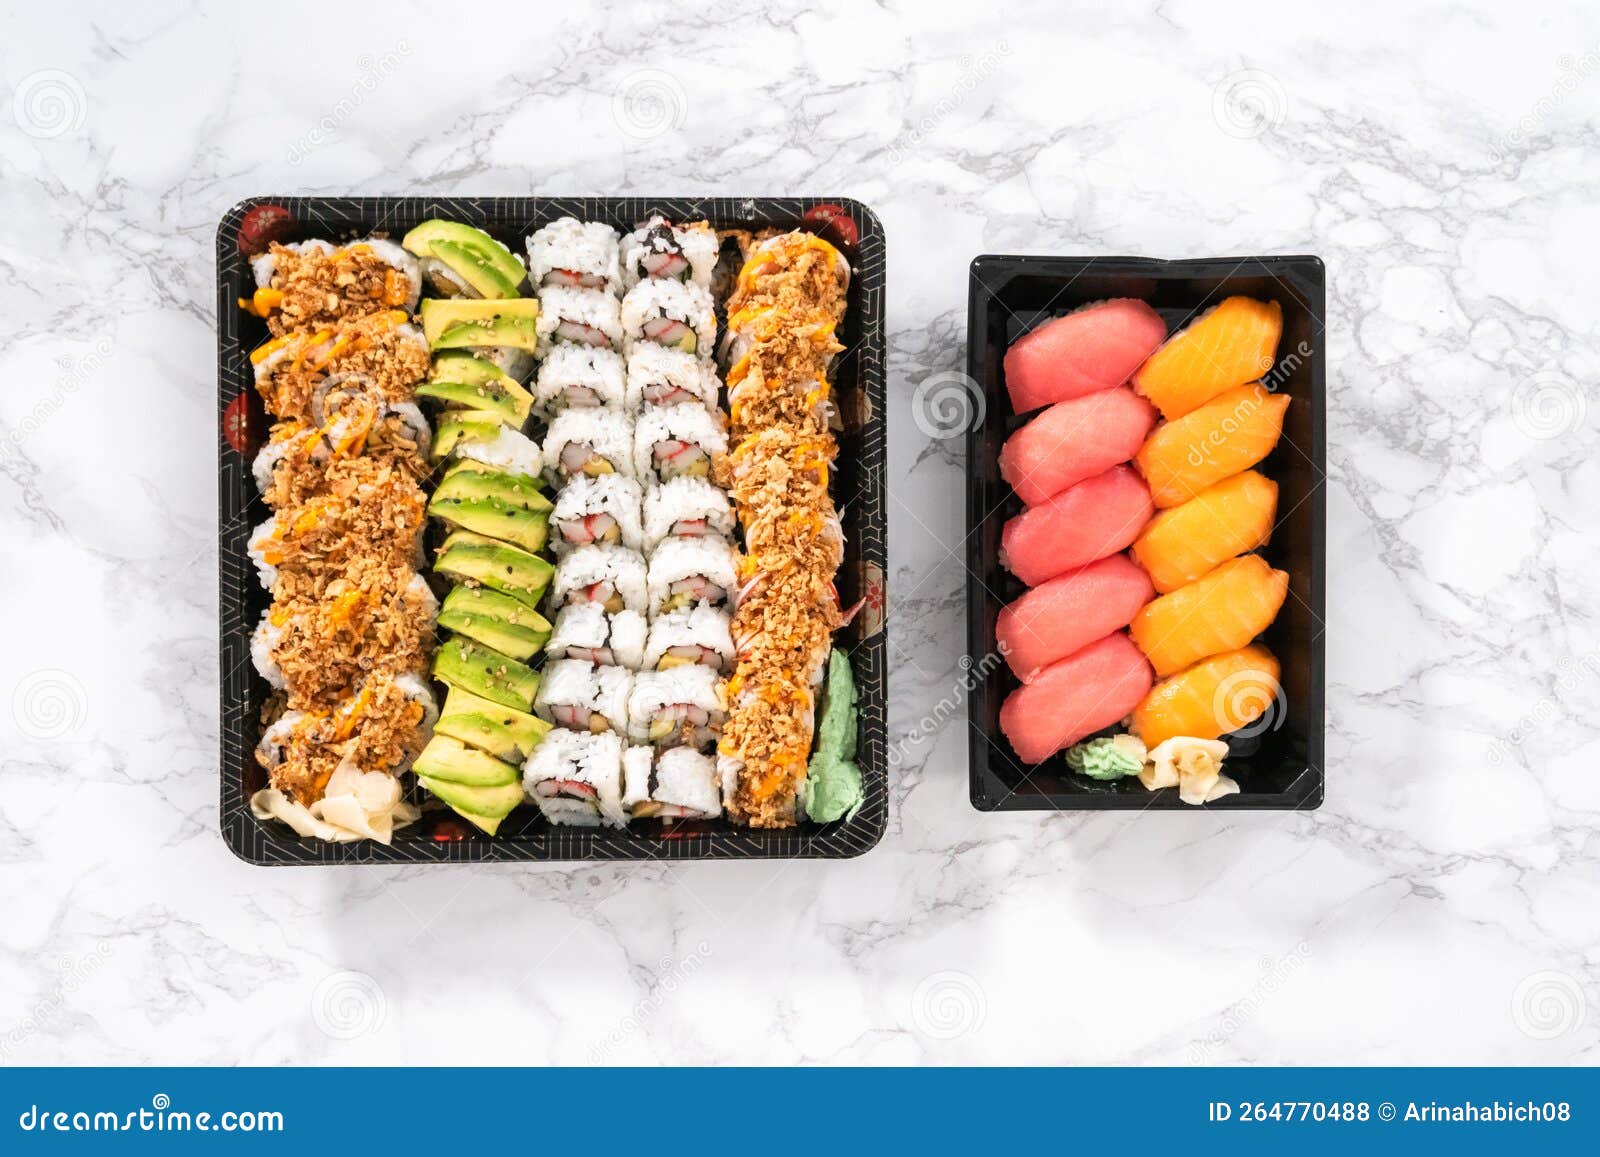 Pre-packaged sushi. Flat lay. Pre-packaged variety of sushi and sushi rolls in a plastic tray.